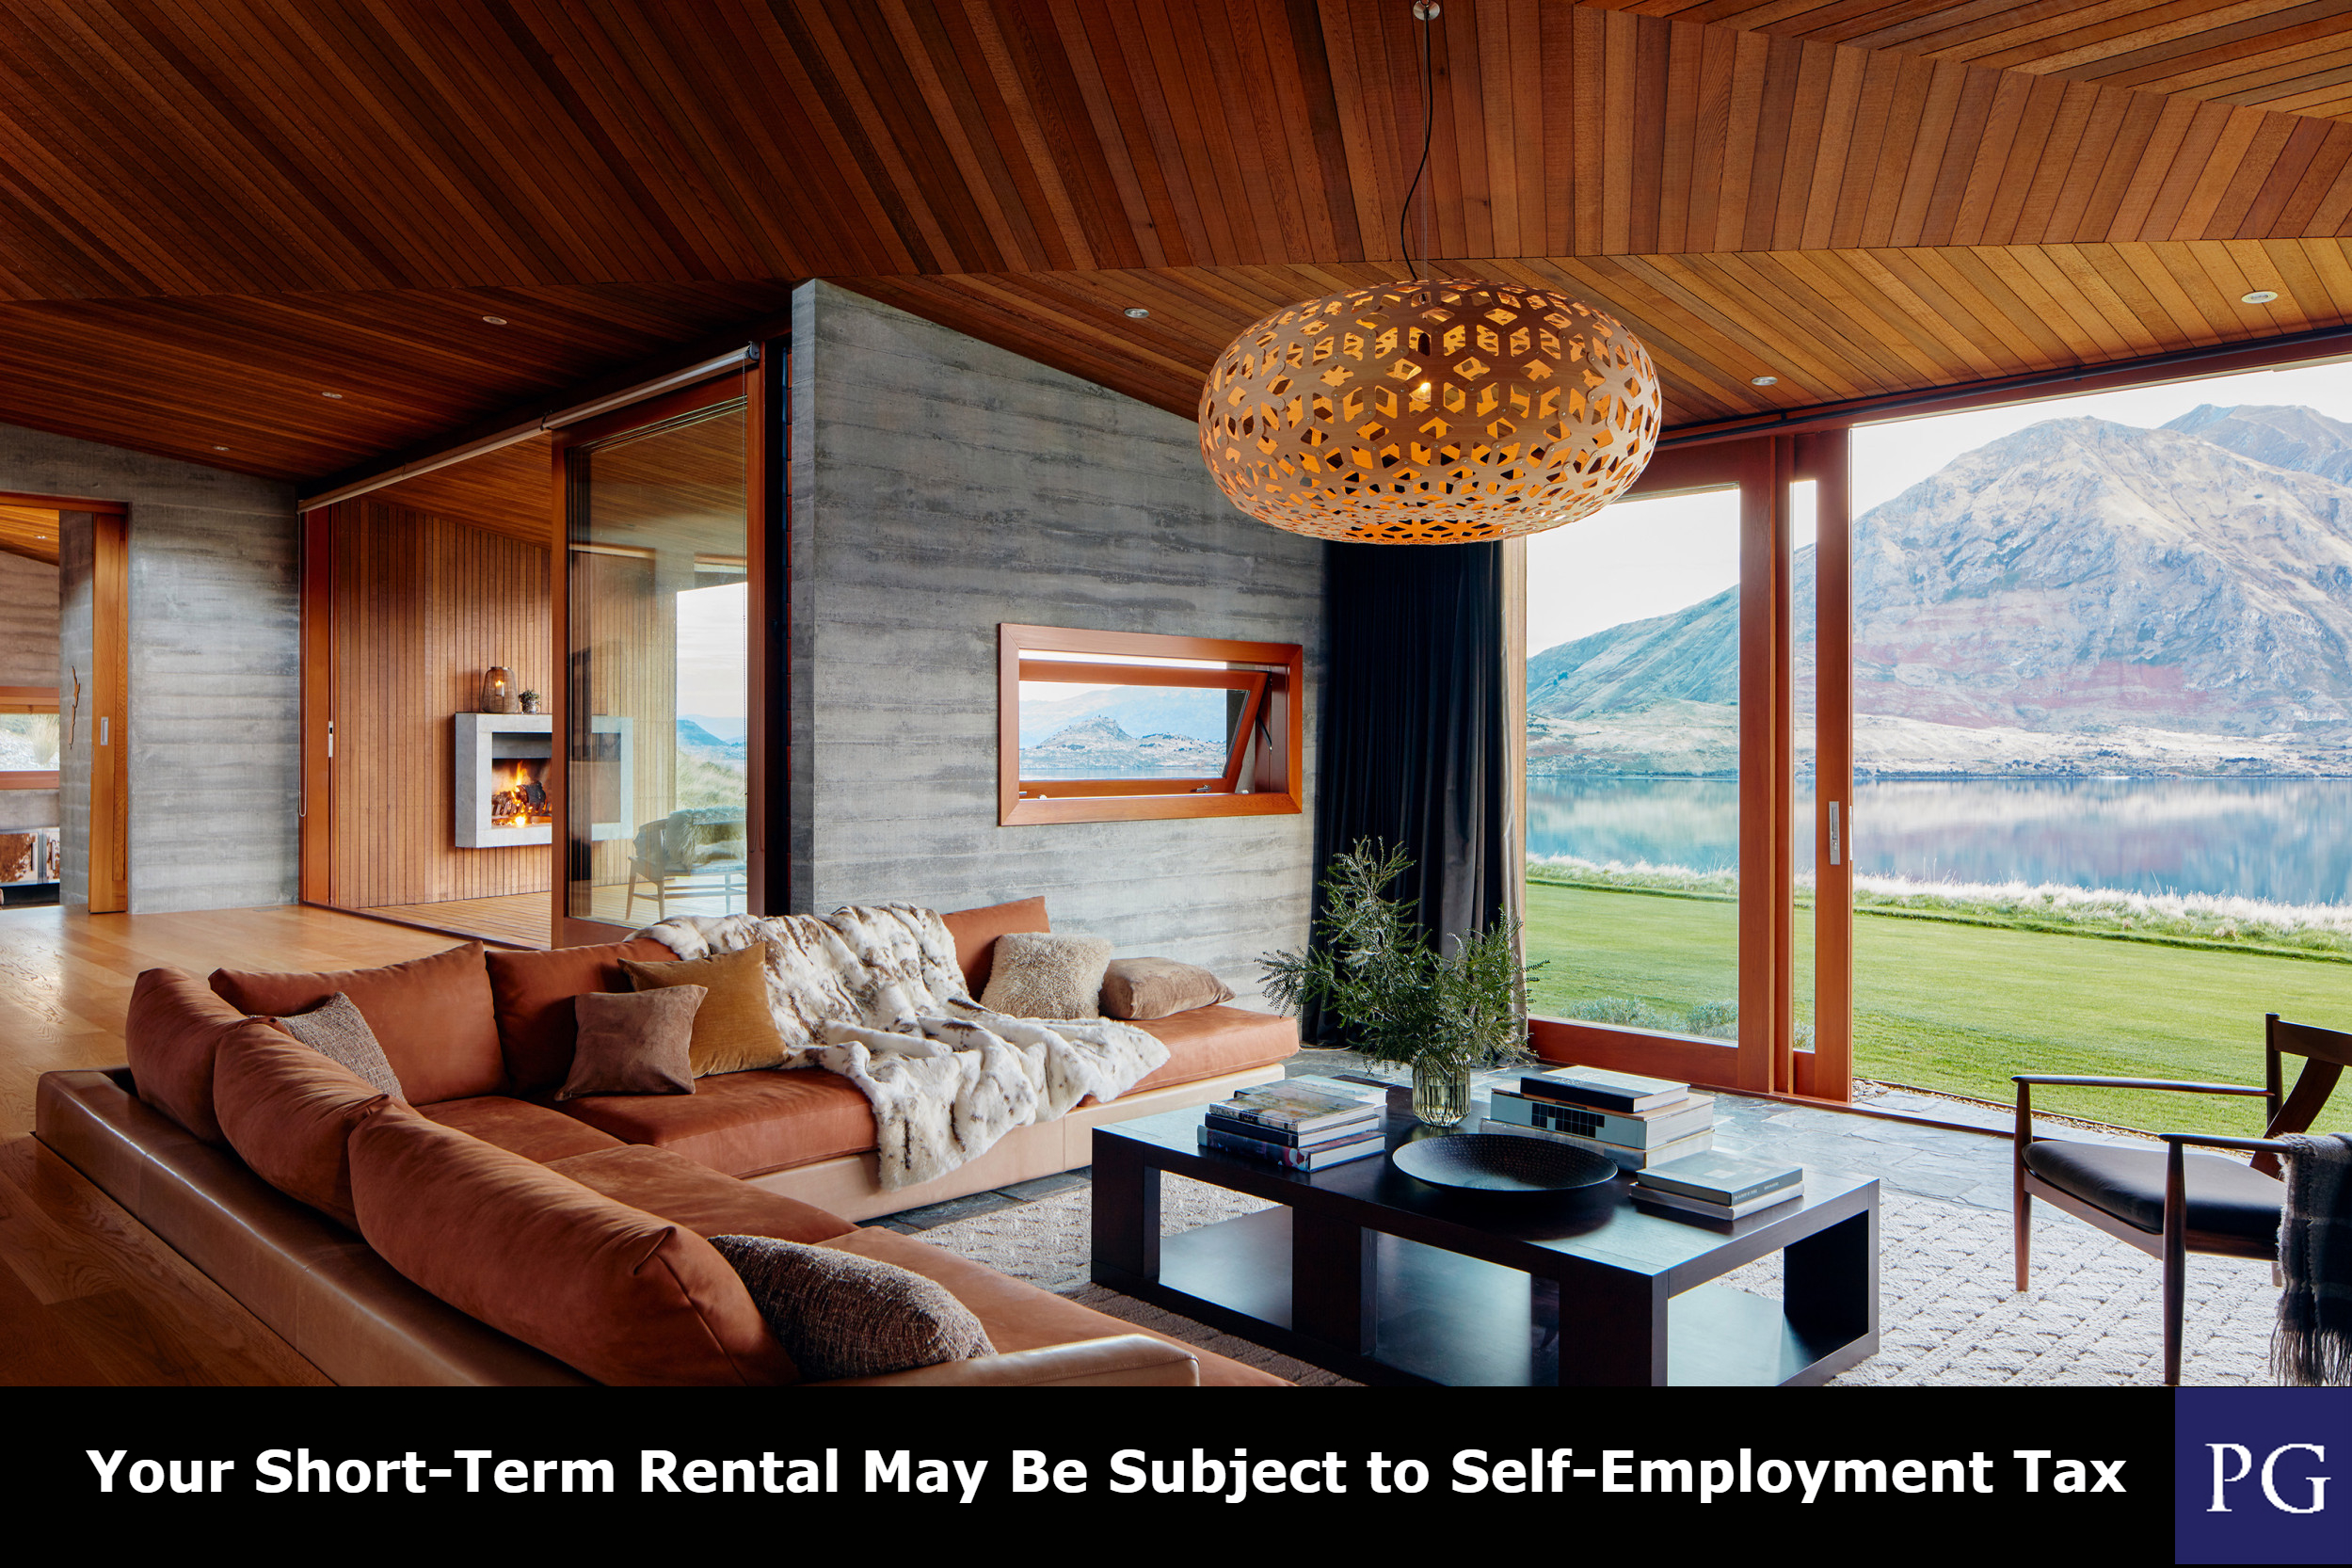 Your Short-Term Rental May Be Subject to Self-Employment Tax